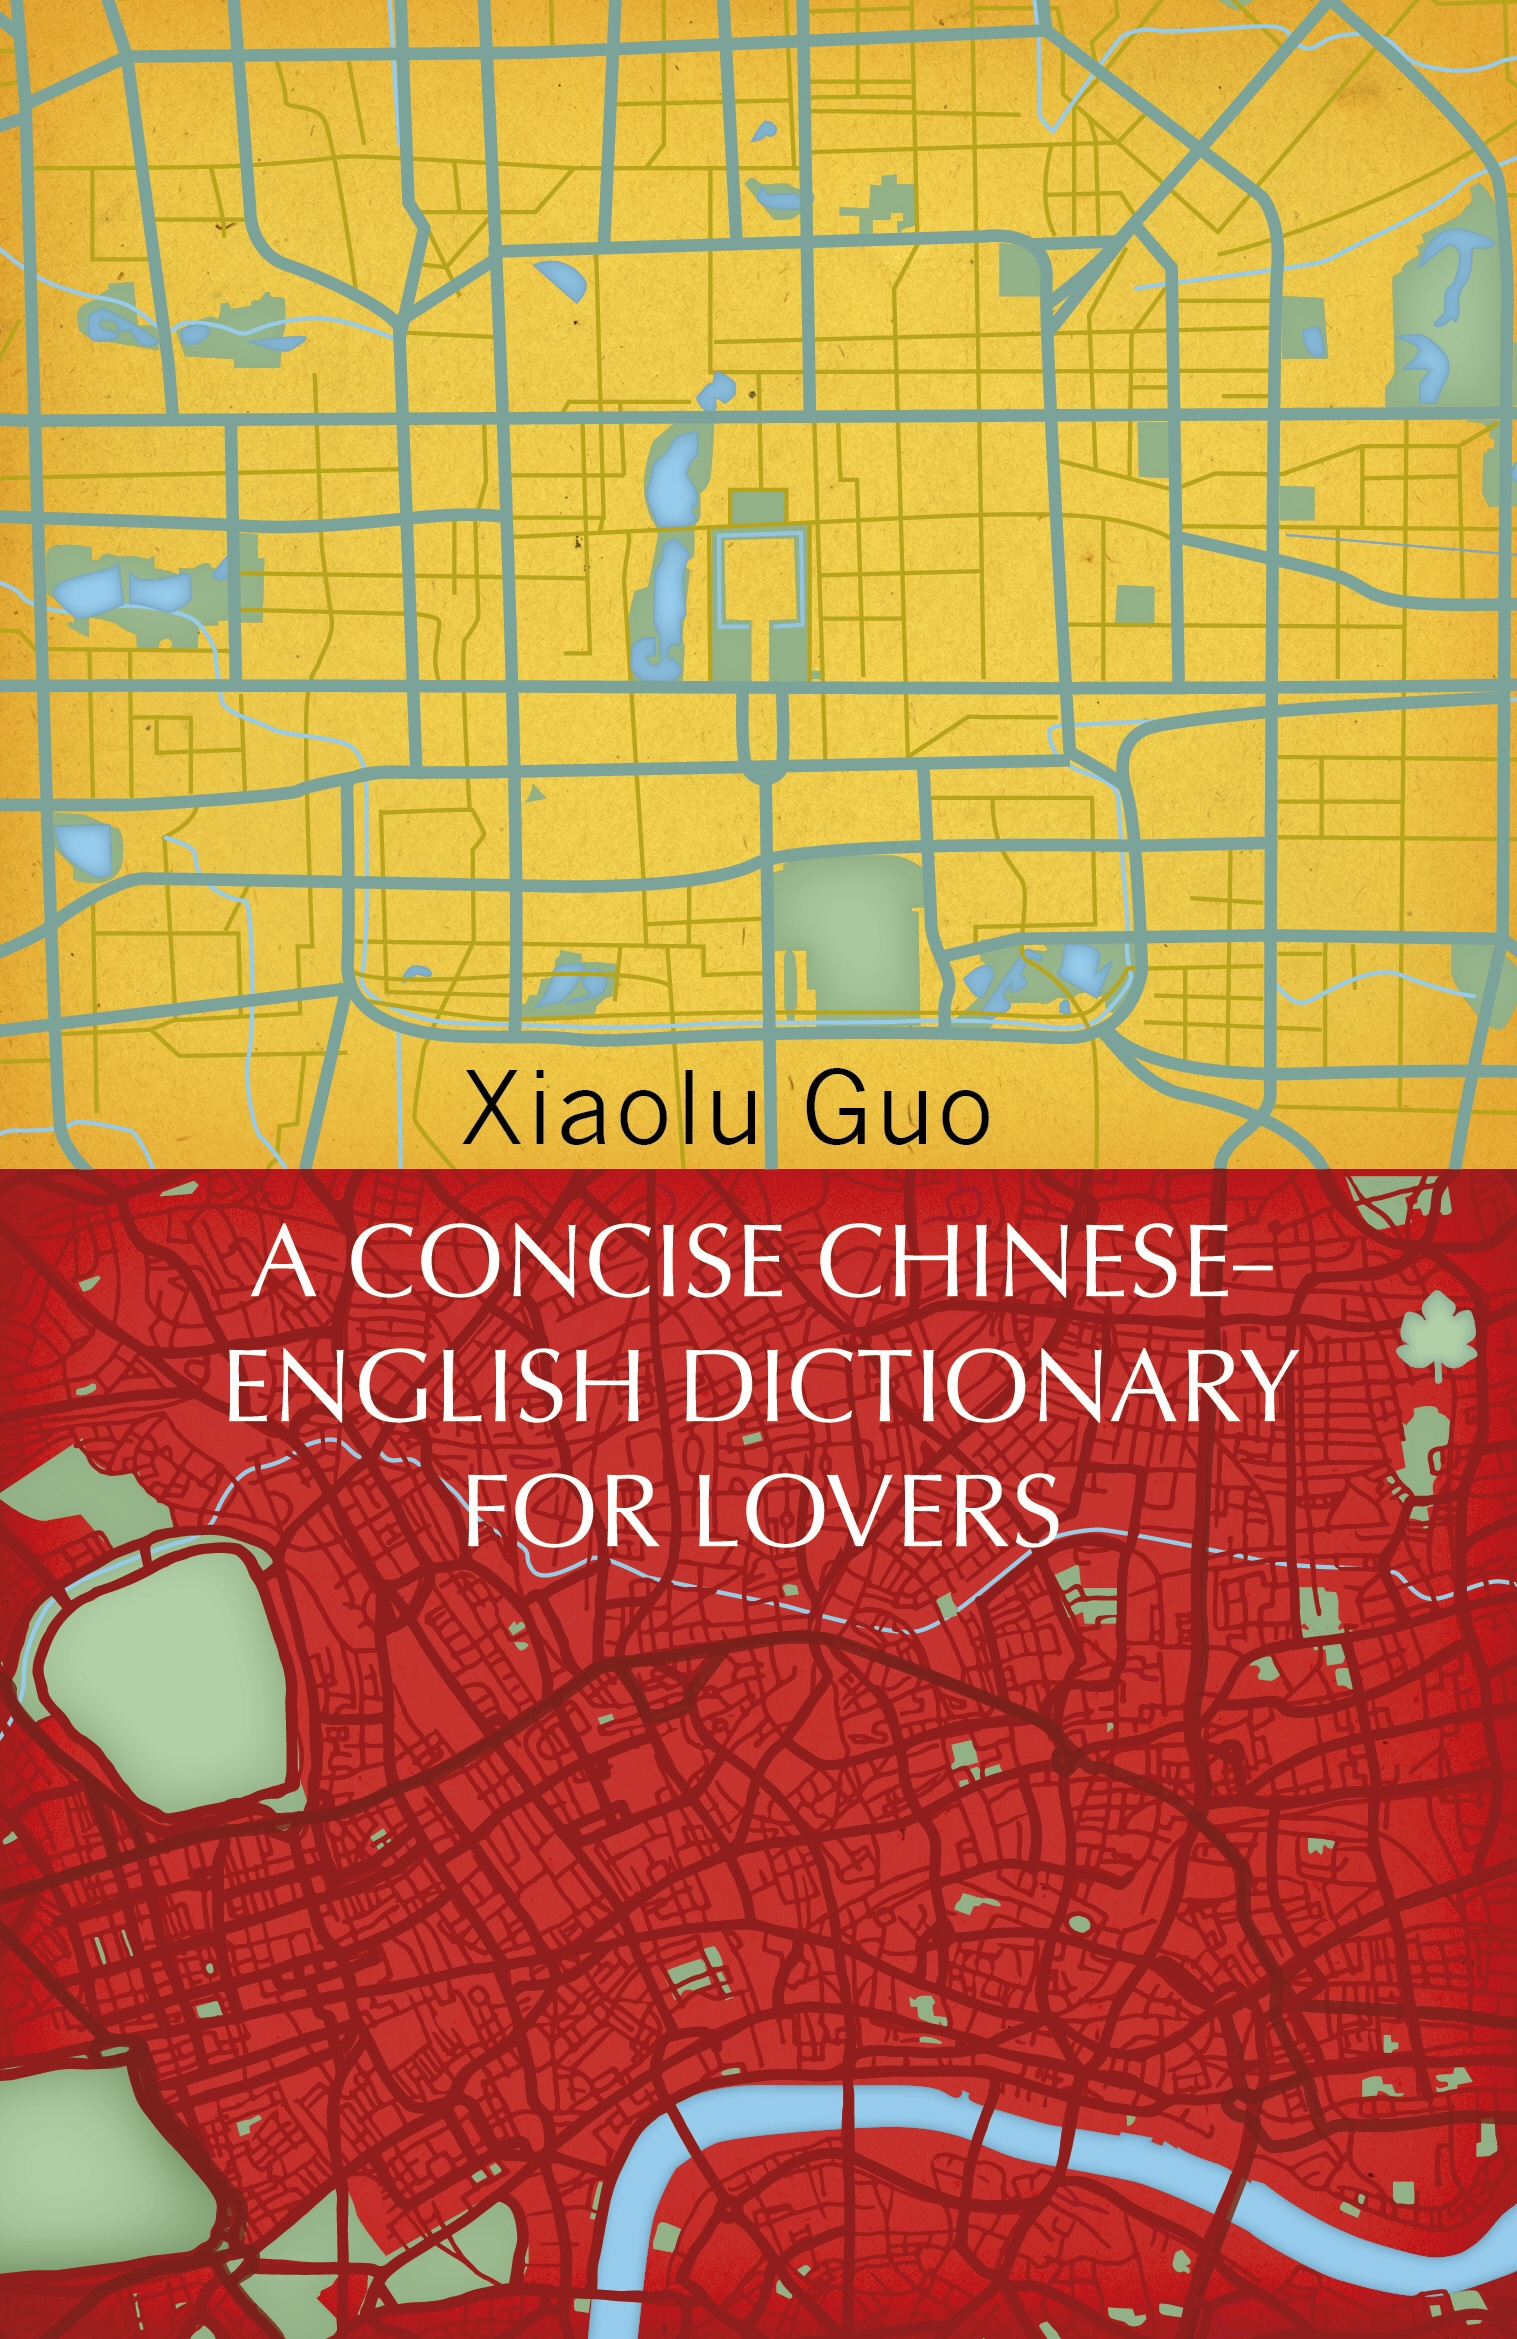 Book “A Concise Chinese-English Dictionary for Lovers” by Xiaolu Guo — June 6, 2019